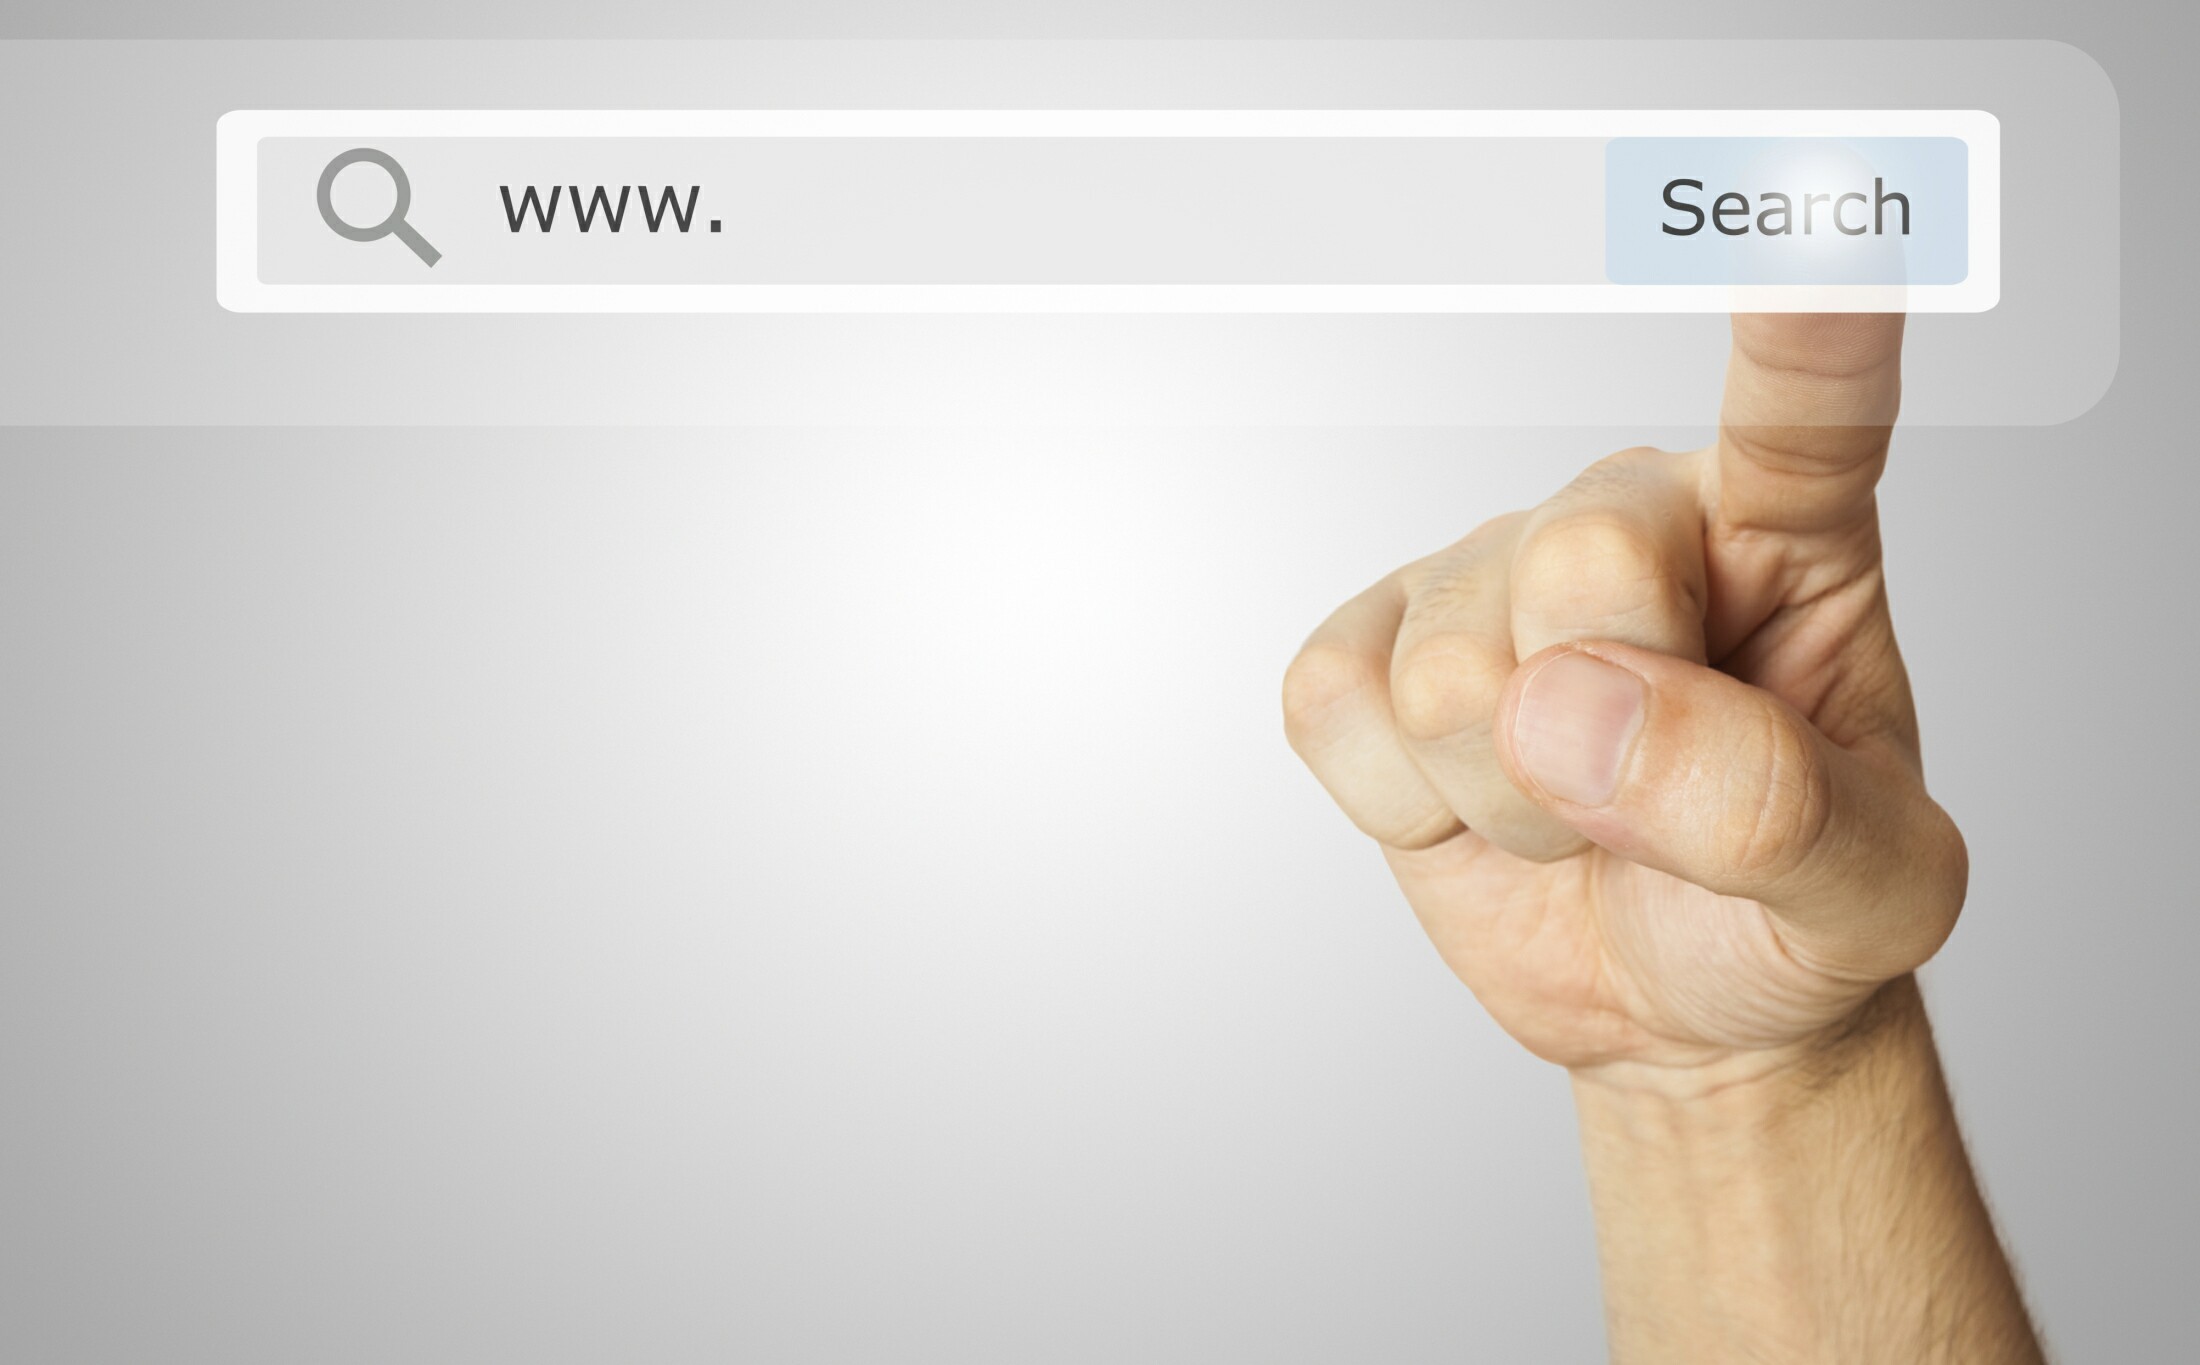 Safe searches begin with a safe search engine.